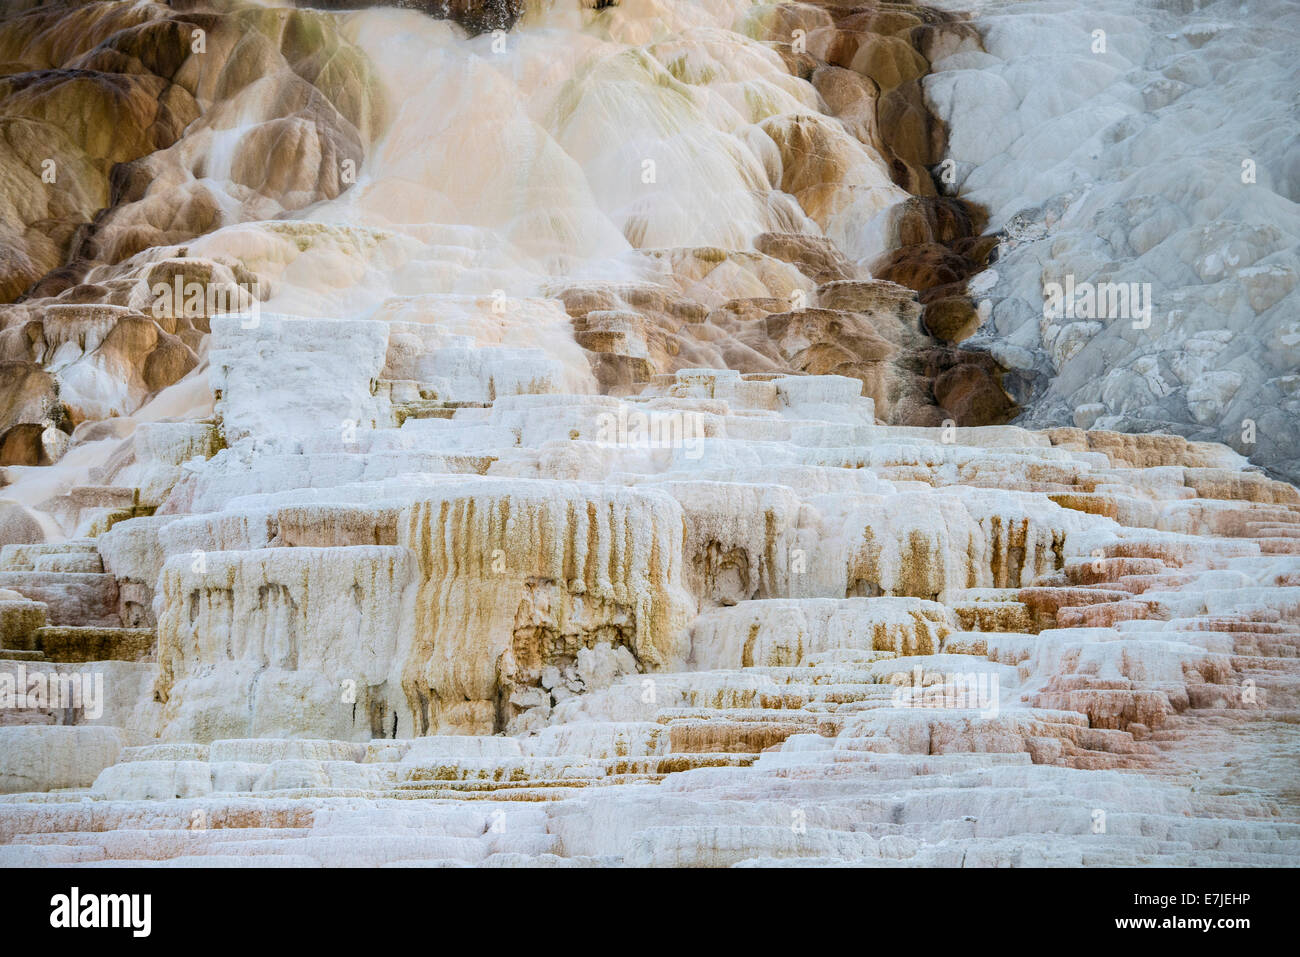 Mammoth Hot Springs, Yellowstone, National Park, Wyoming, USA, United States, America, calcium, carbonate, terraces Stock Photo